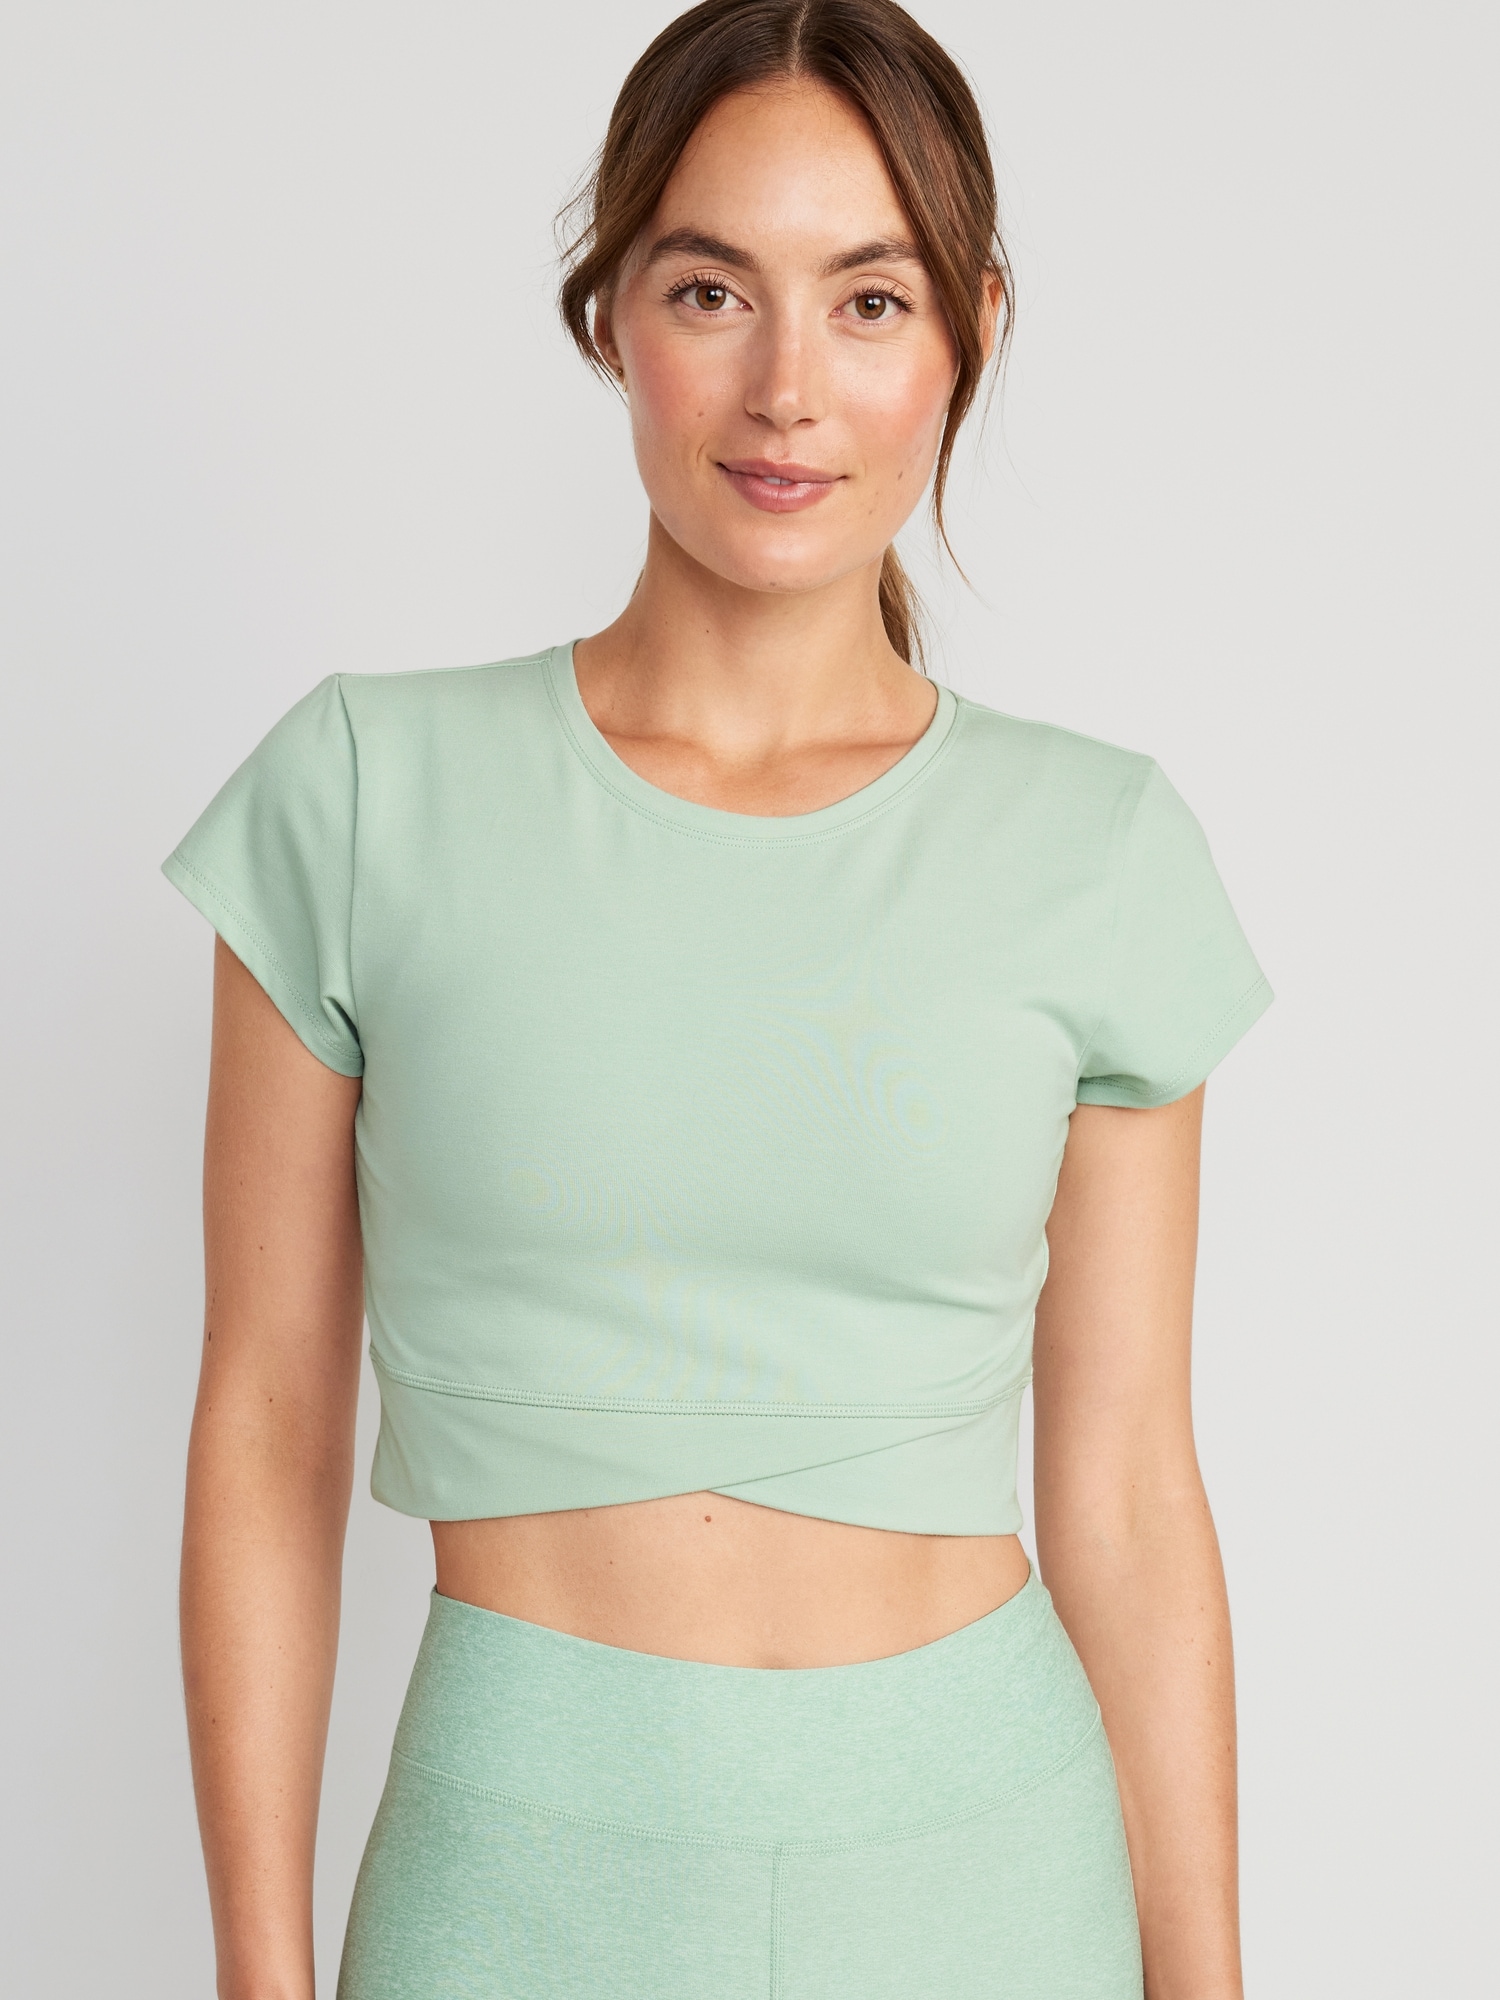 Kredsløb rester bryder ud PowerChill Cropped Cross-Front T-Shirt for Women | Old Navy